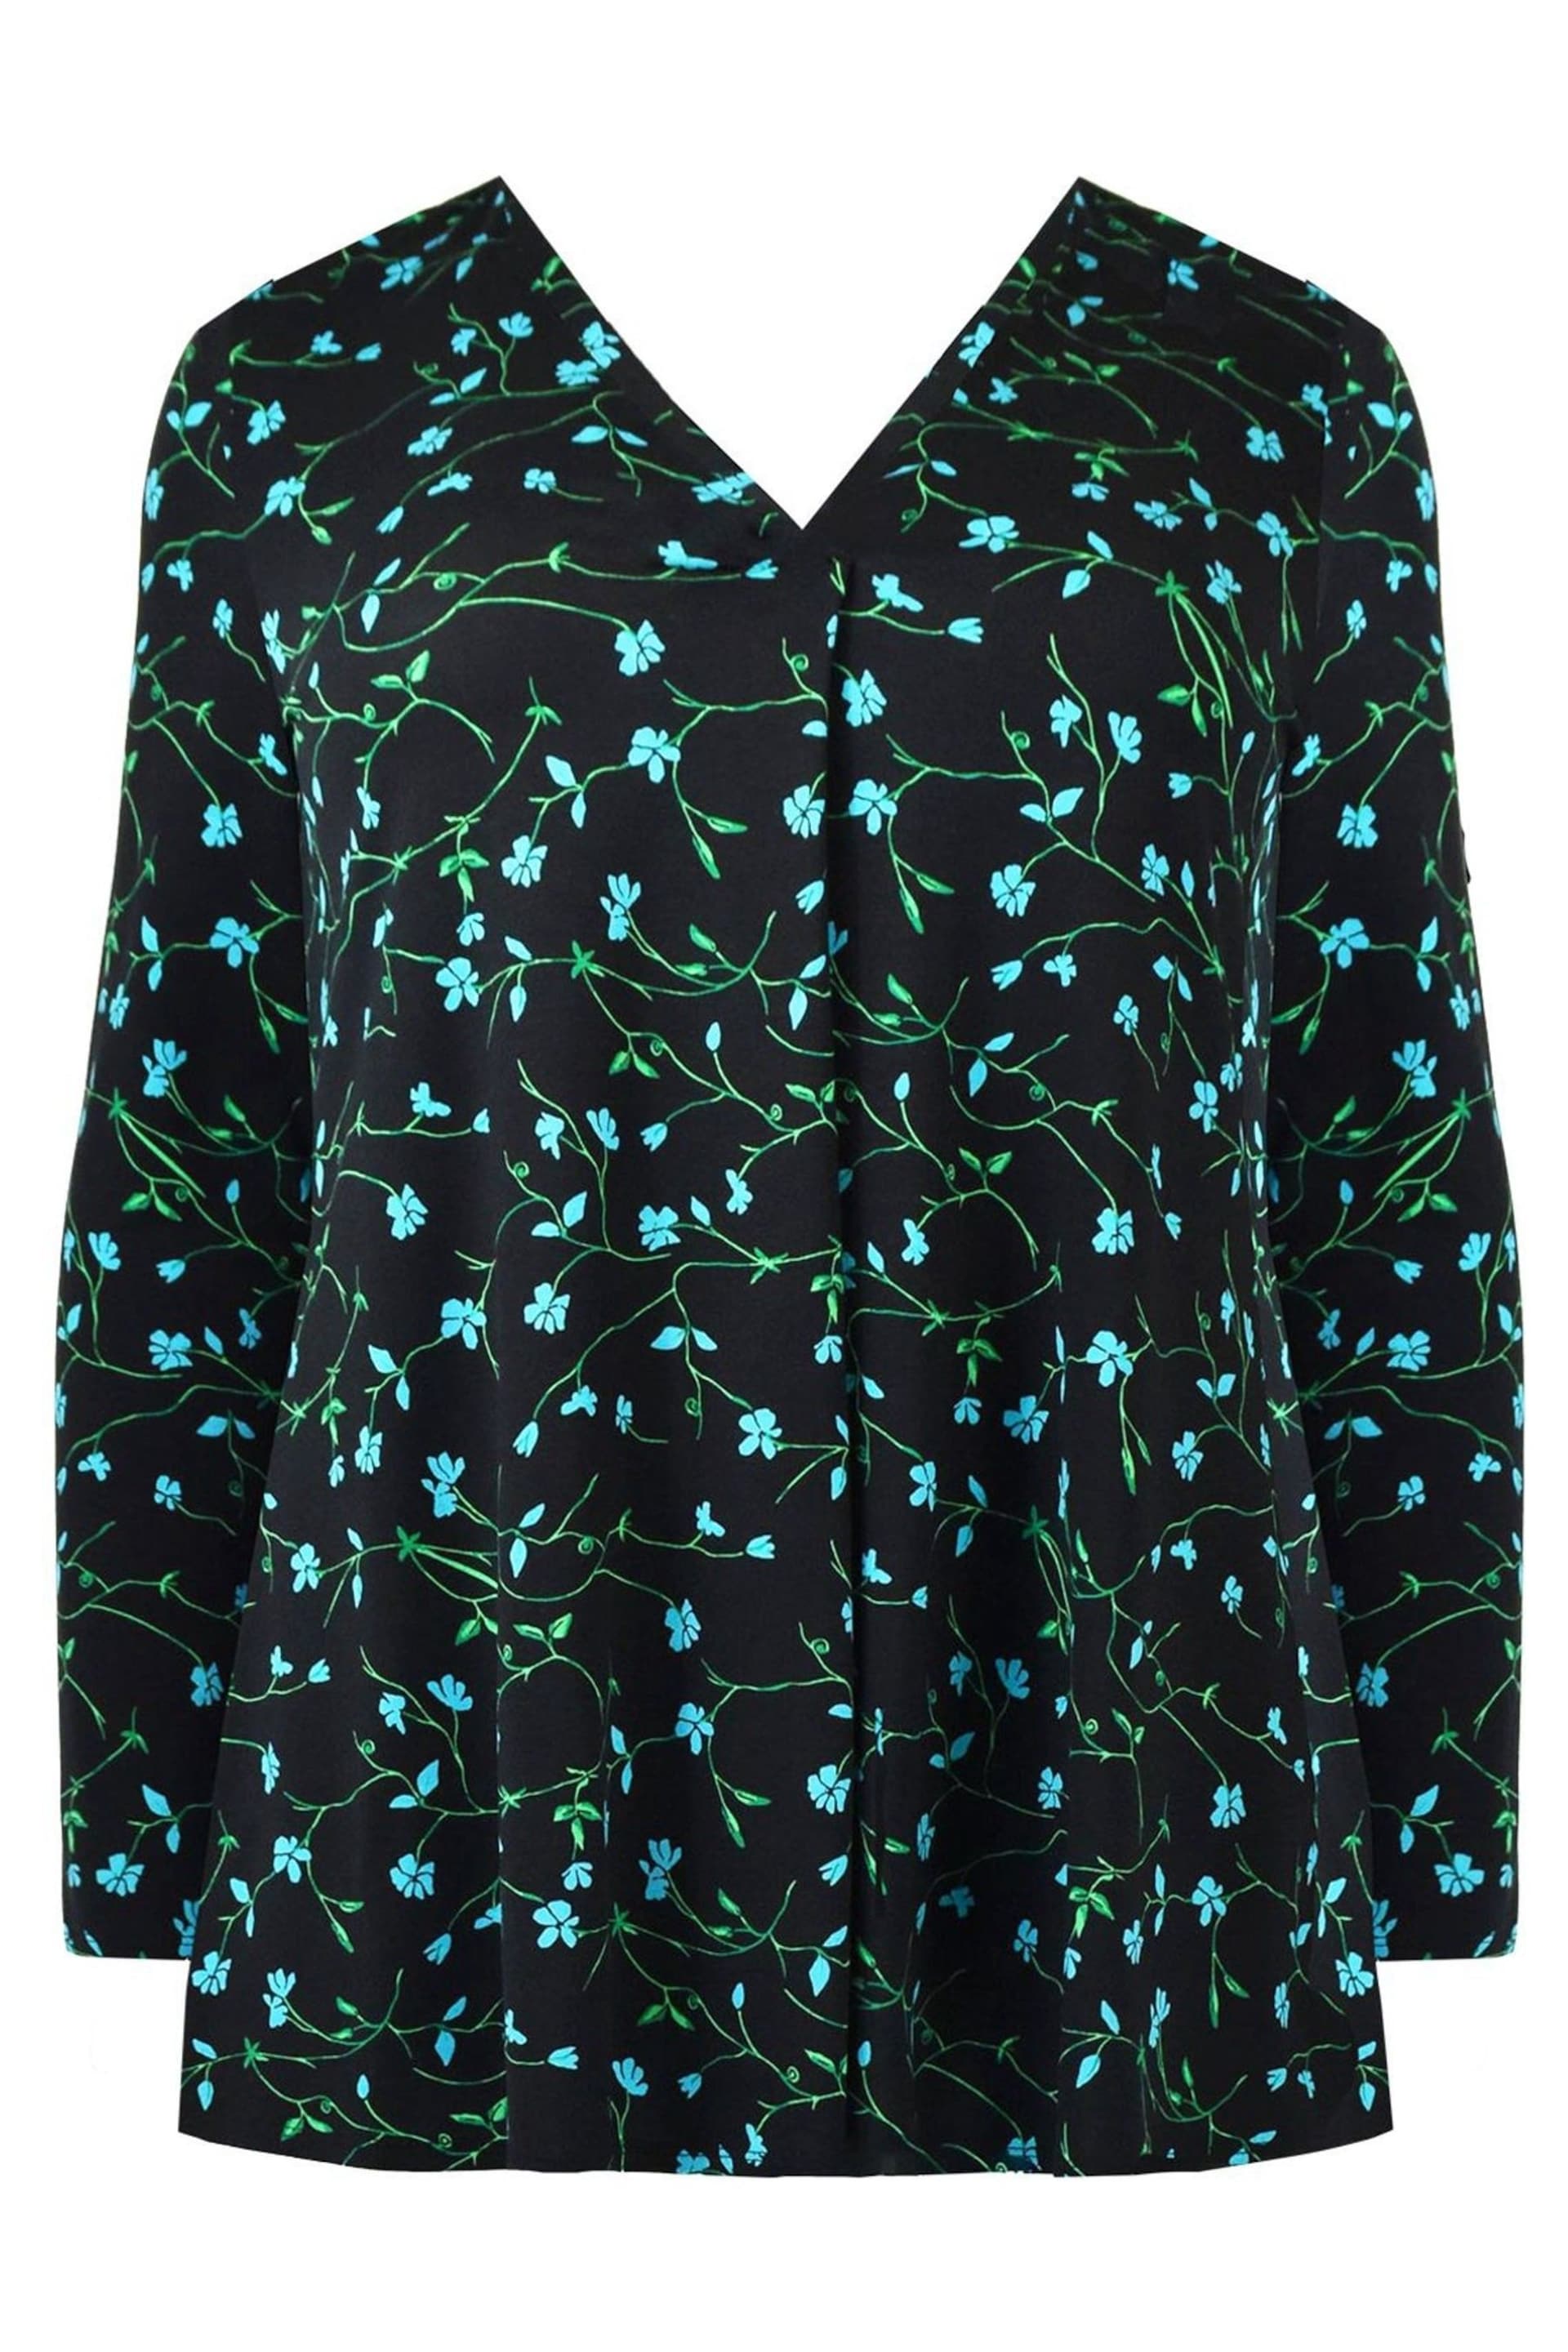 Live Unlimited Curve Blue Ditsy Print Jersey Pleat Front Top - Image 4 of 5